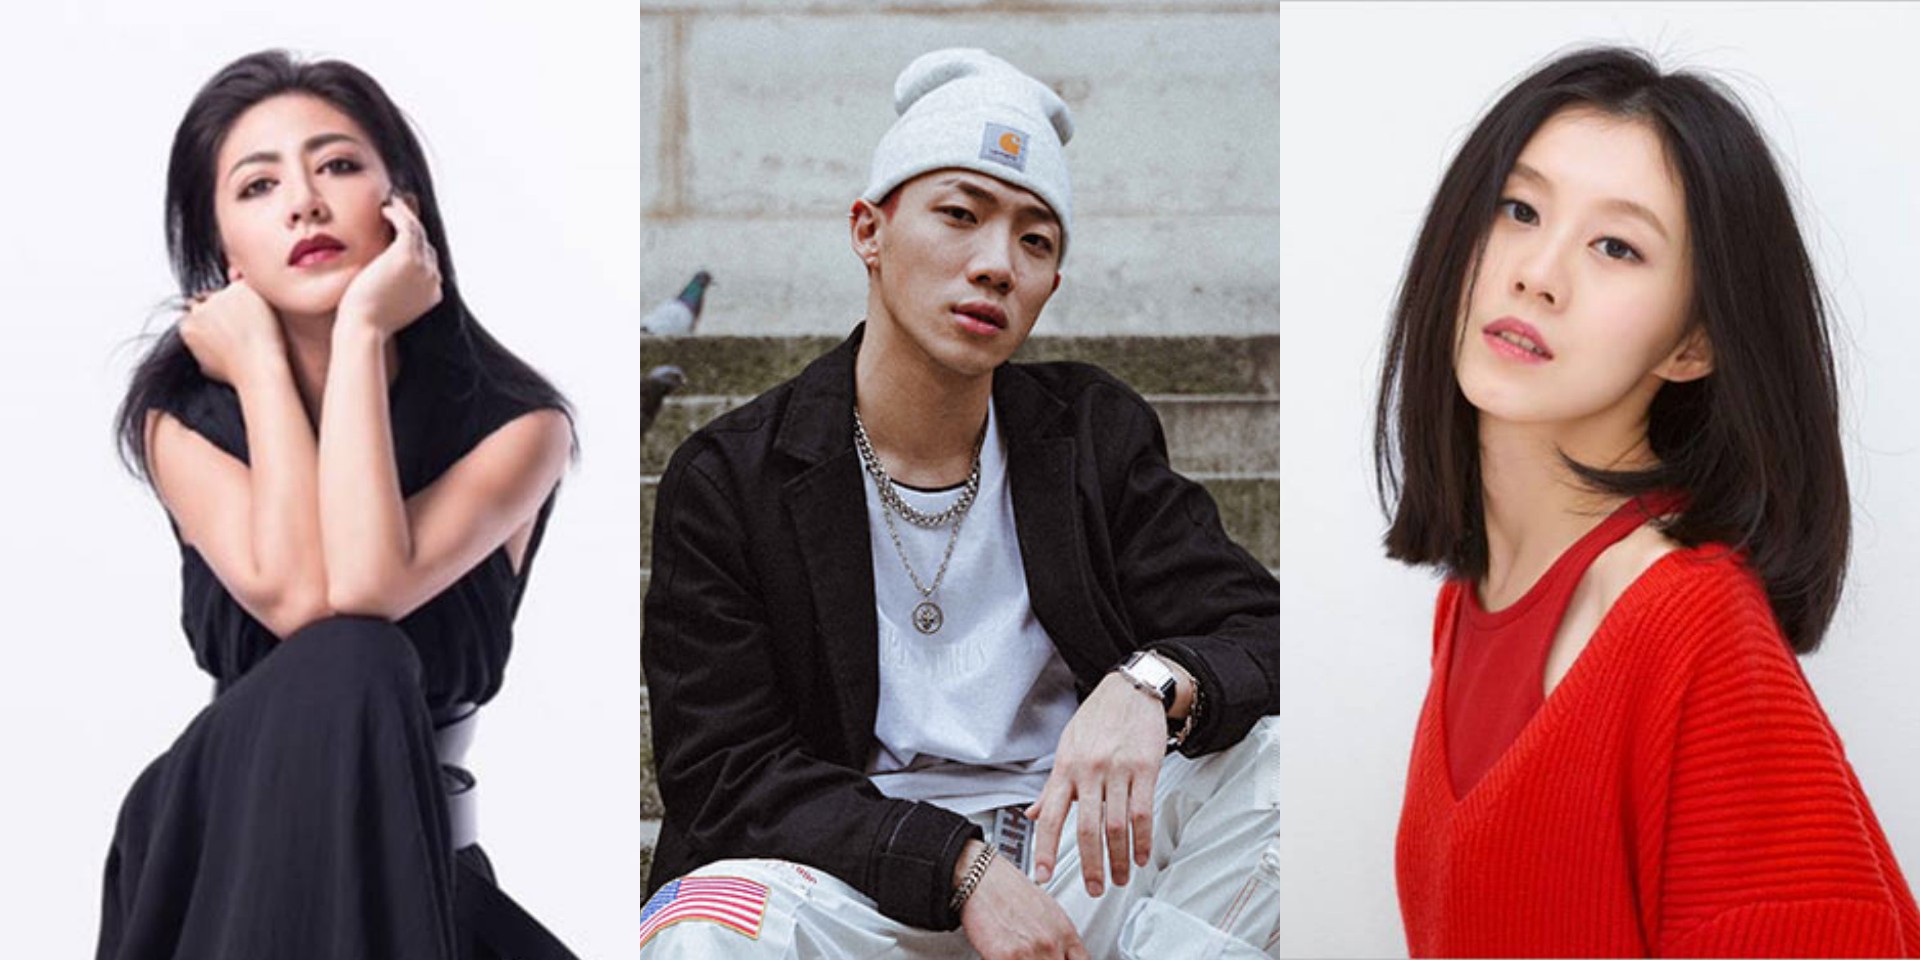 Huayi – Chinese Festival of Arts 2020 will feature ØZI, Eve Ai, Ann Bai, and more